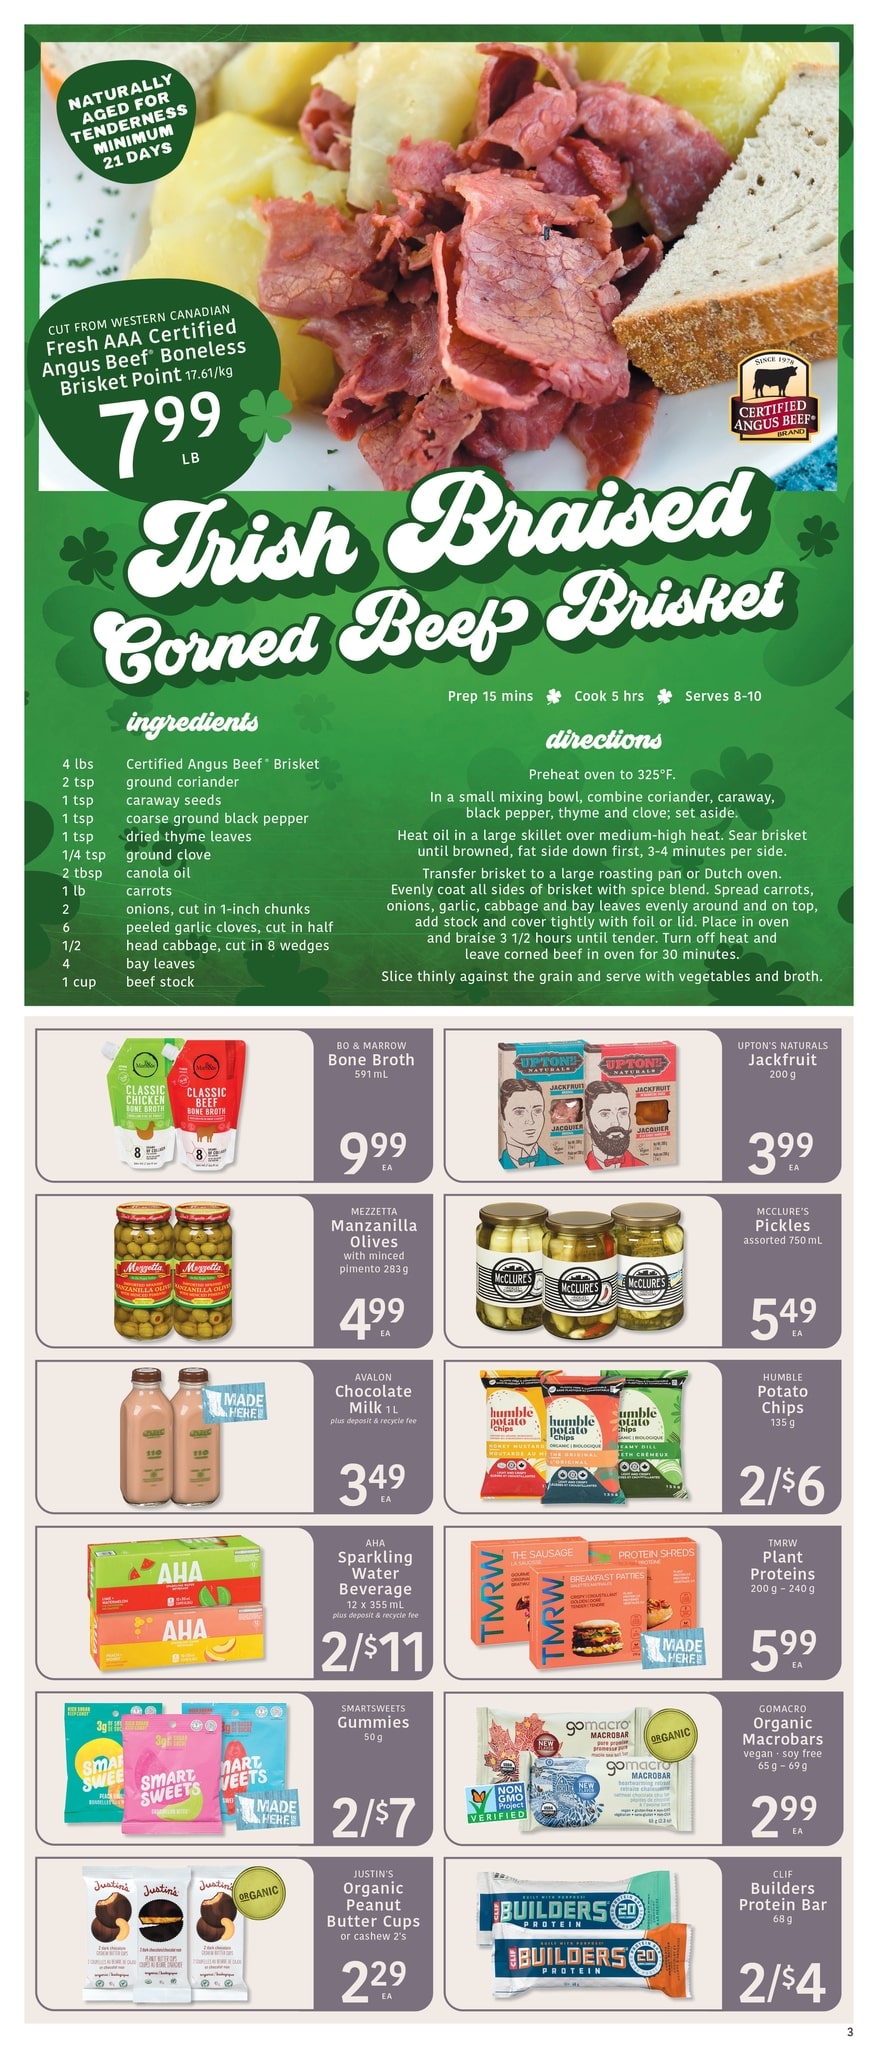 Fresh St. Market - Weekly Flyer Specials - Page 3